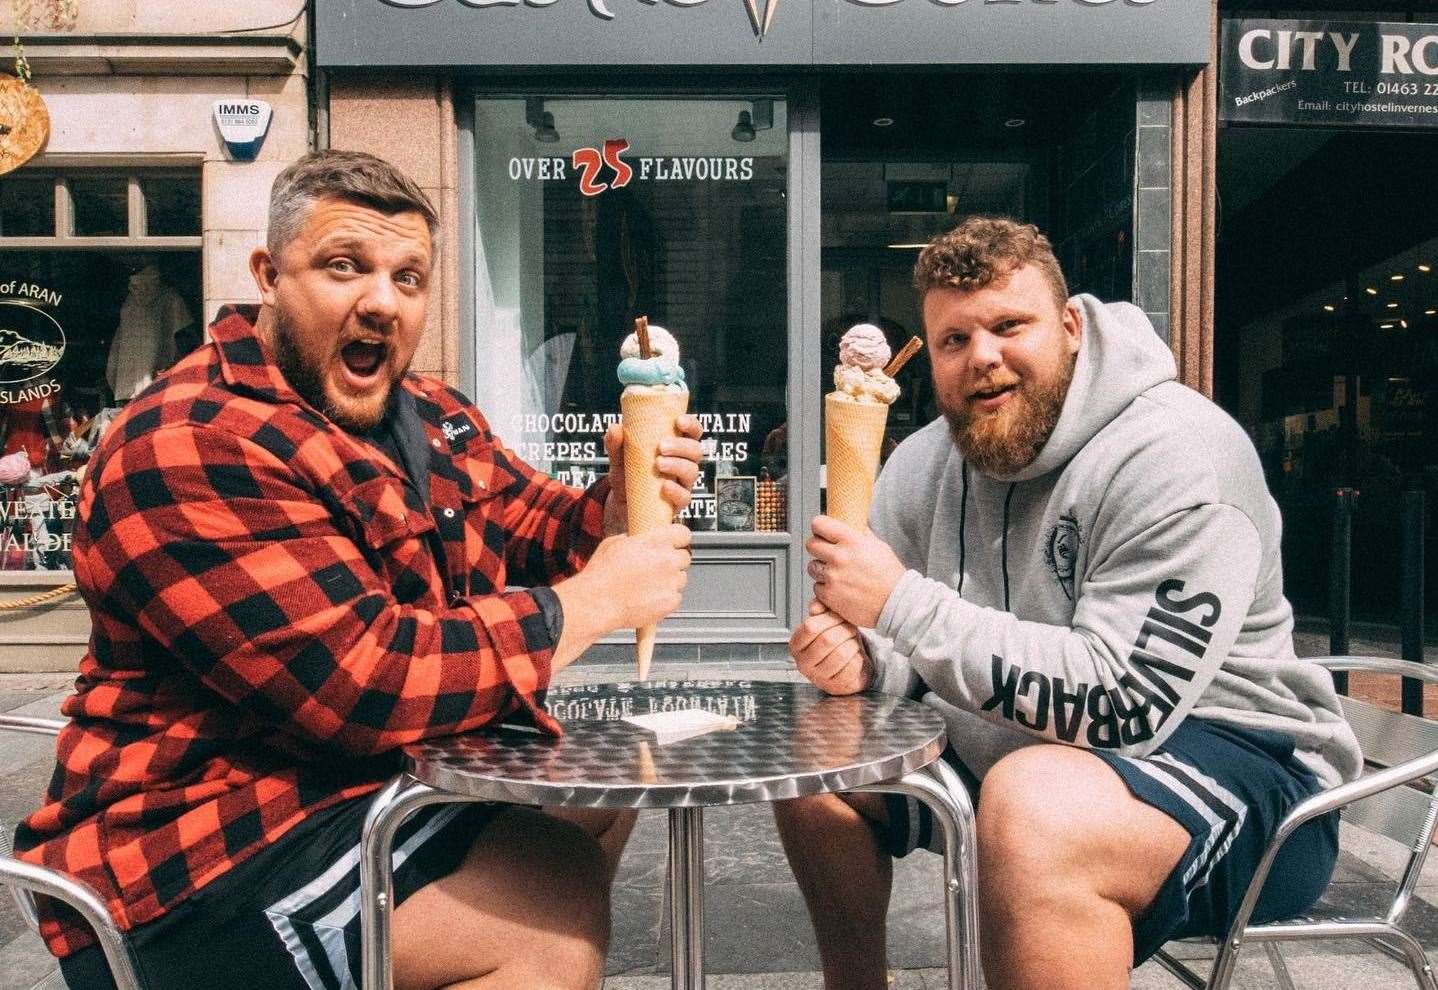 Luke and Tom Stoltman with the Stoltman cone. Picture from @luke.stoltman